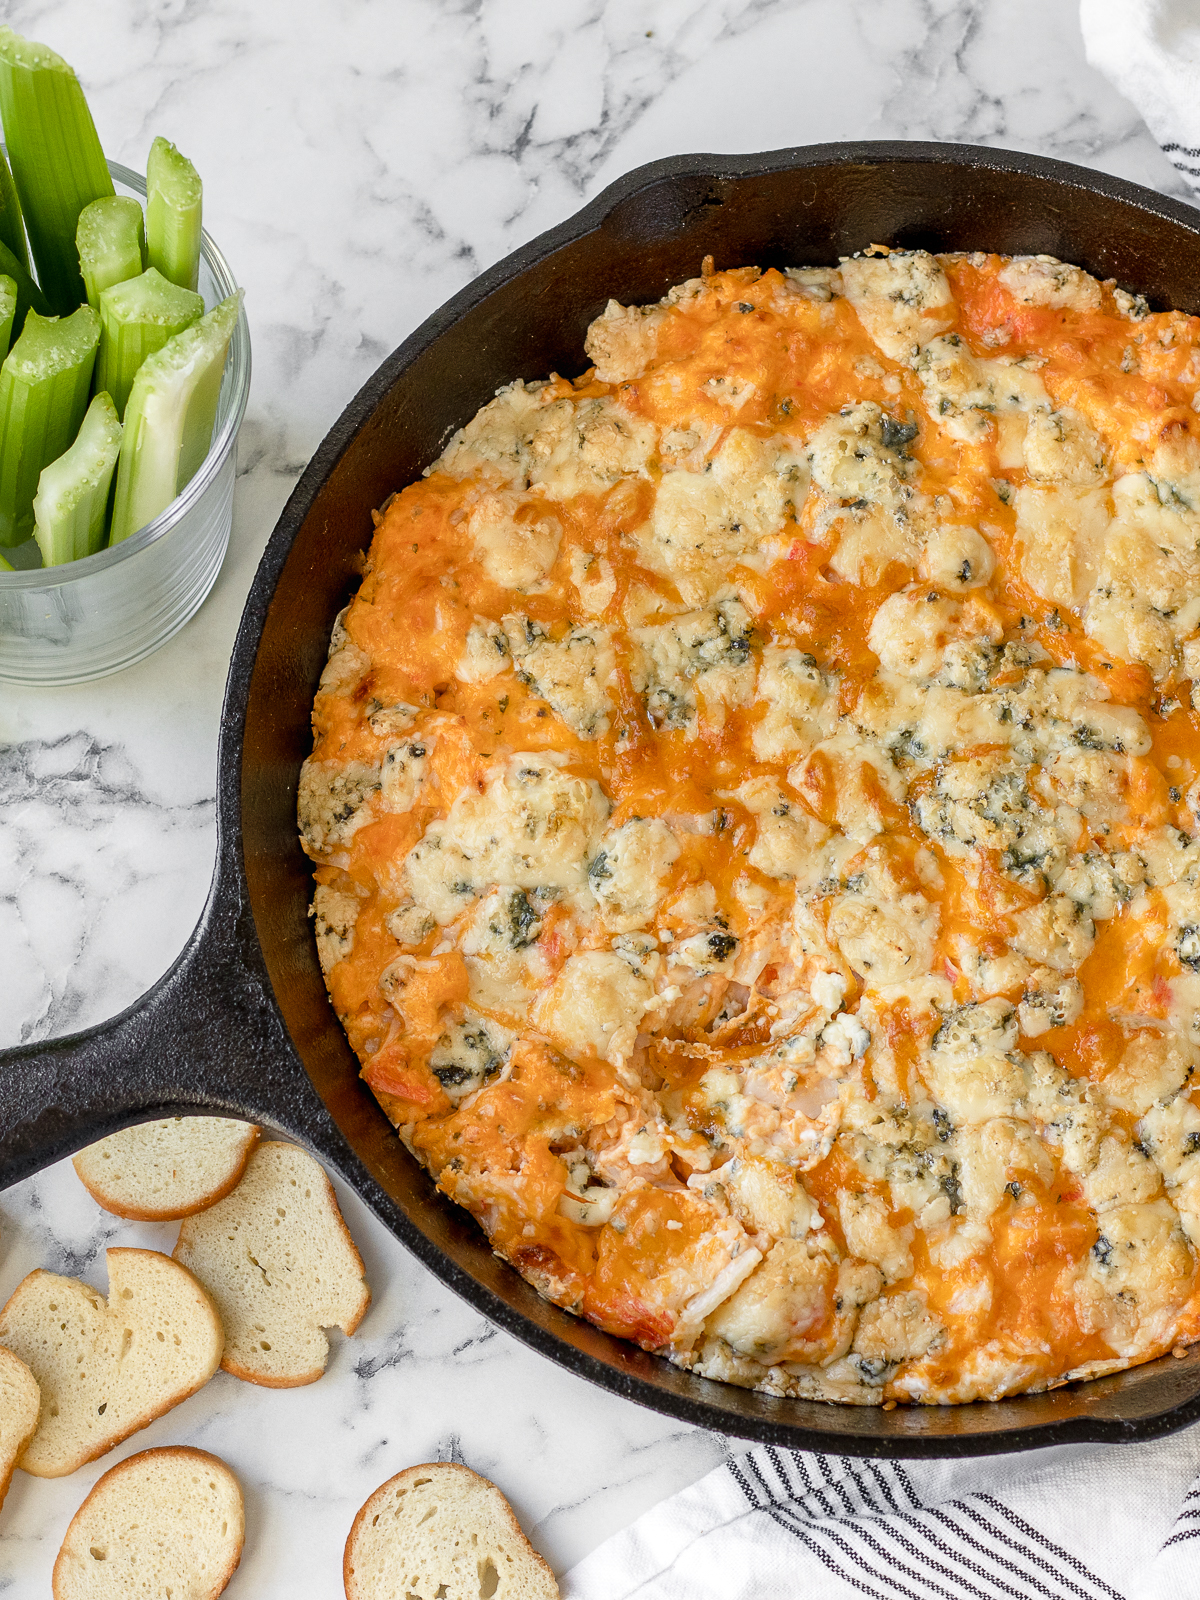 Steaming hot Buffalo Crab Dip in a cast iron skillet surrounded by bagel chips and celery.